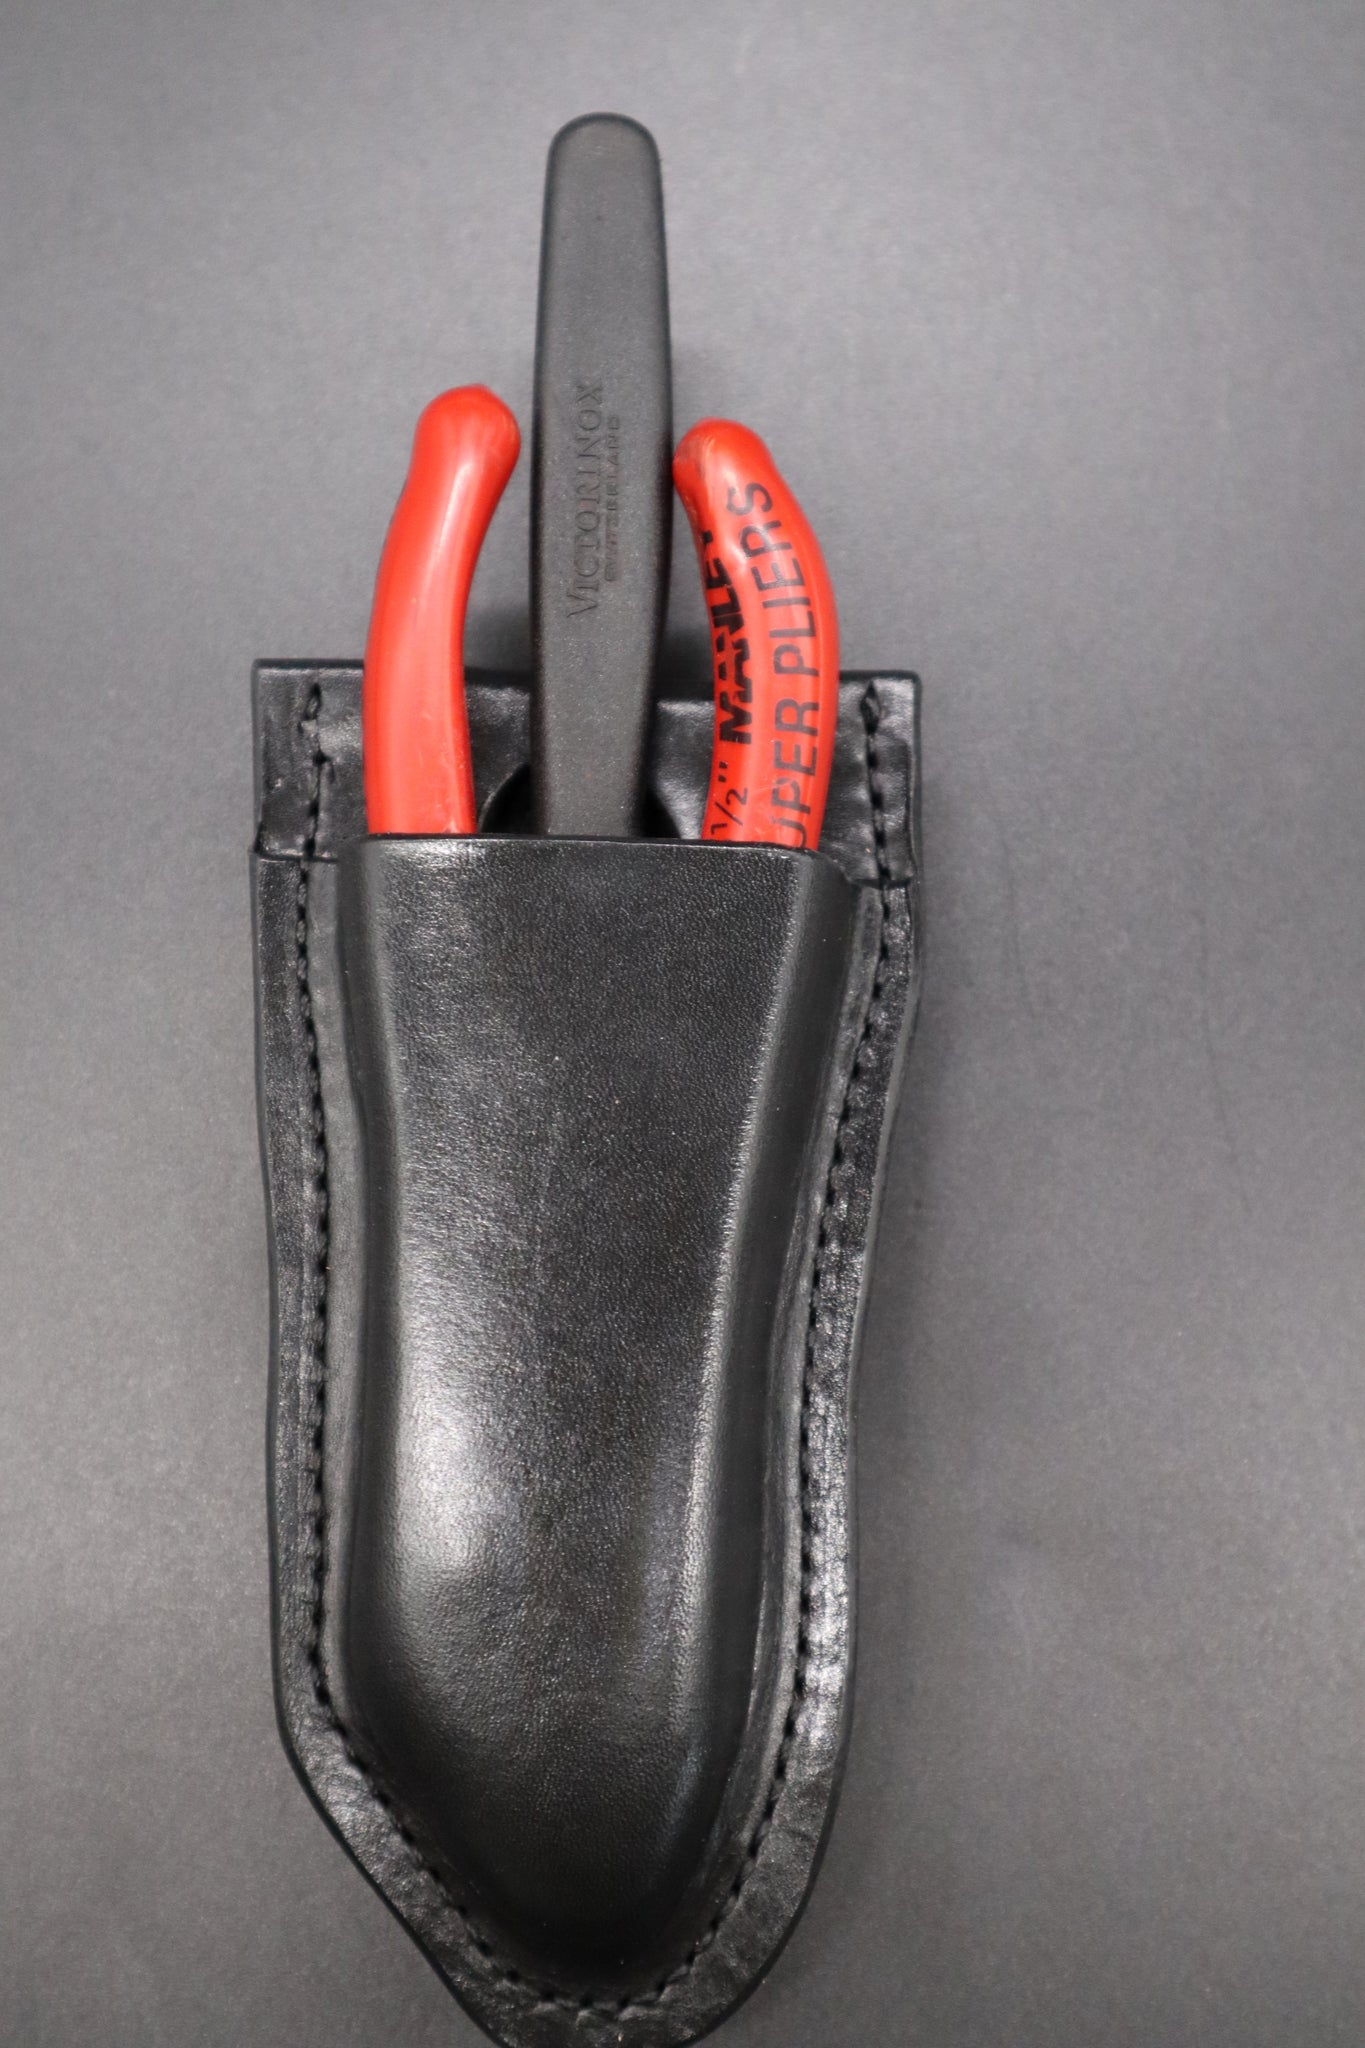 Knife / Pliers Holder 6 & 9: Miller Marine Products